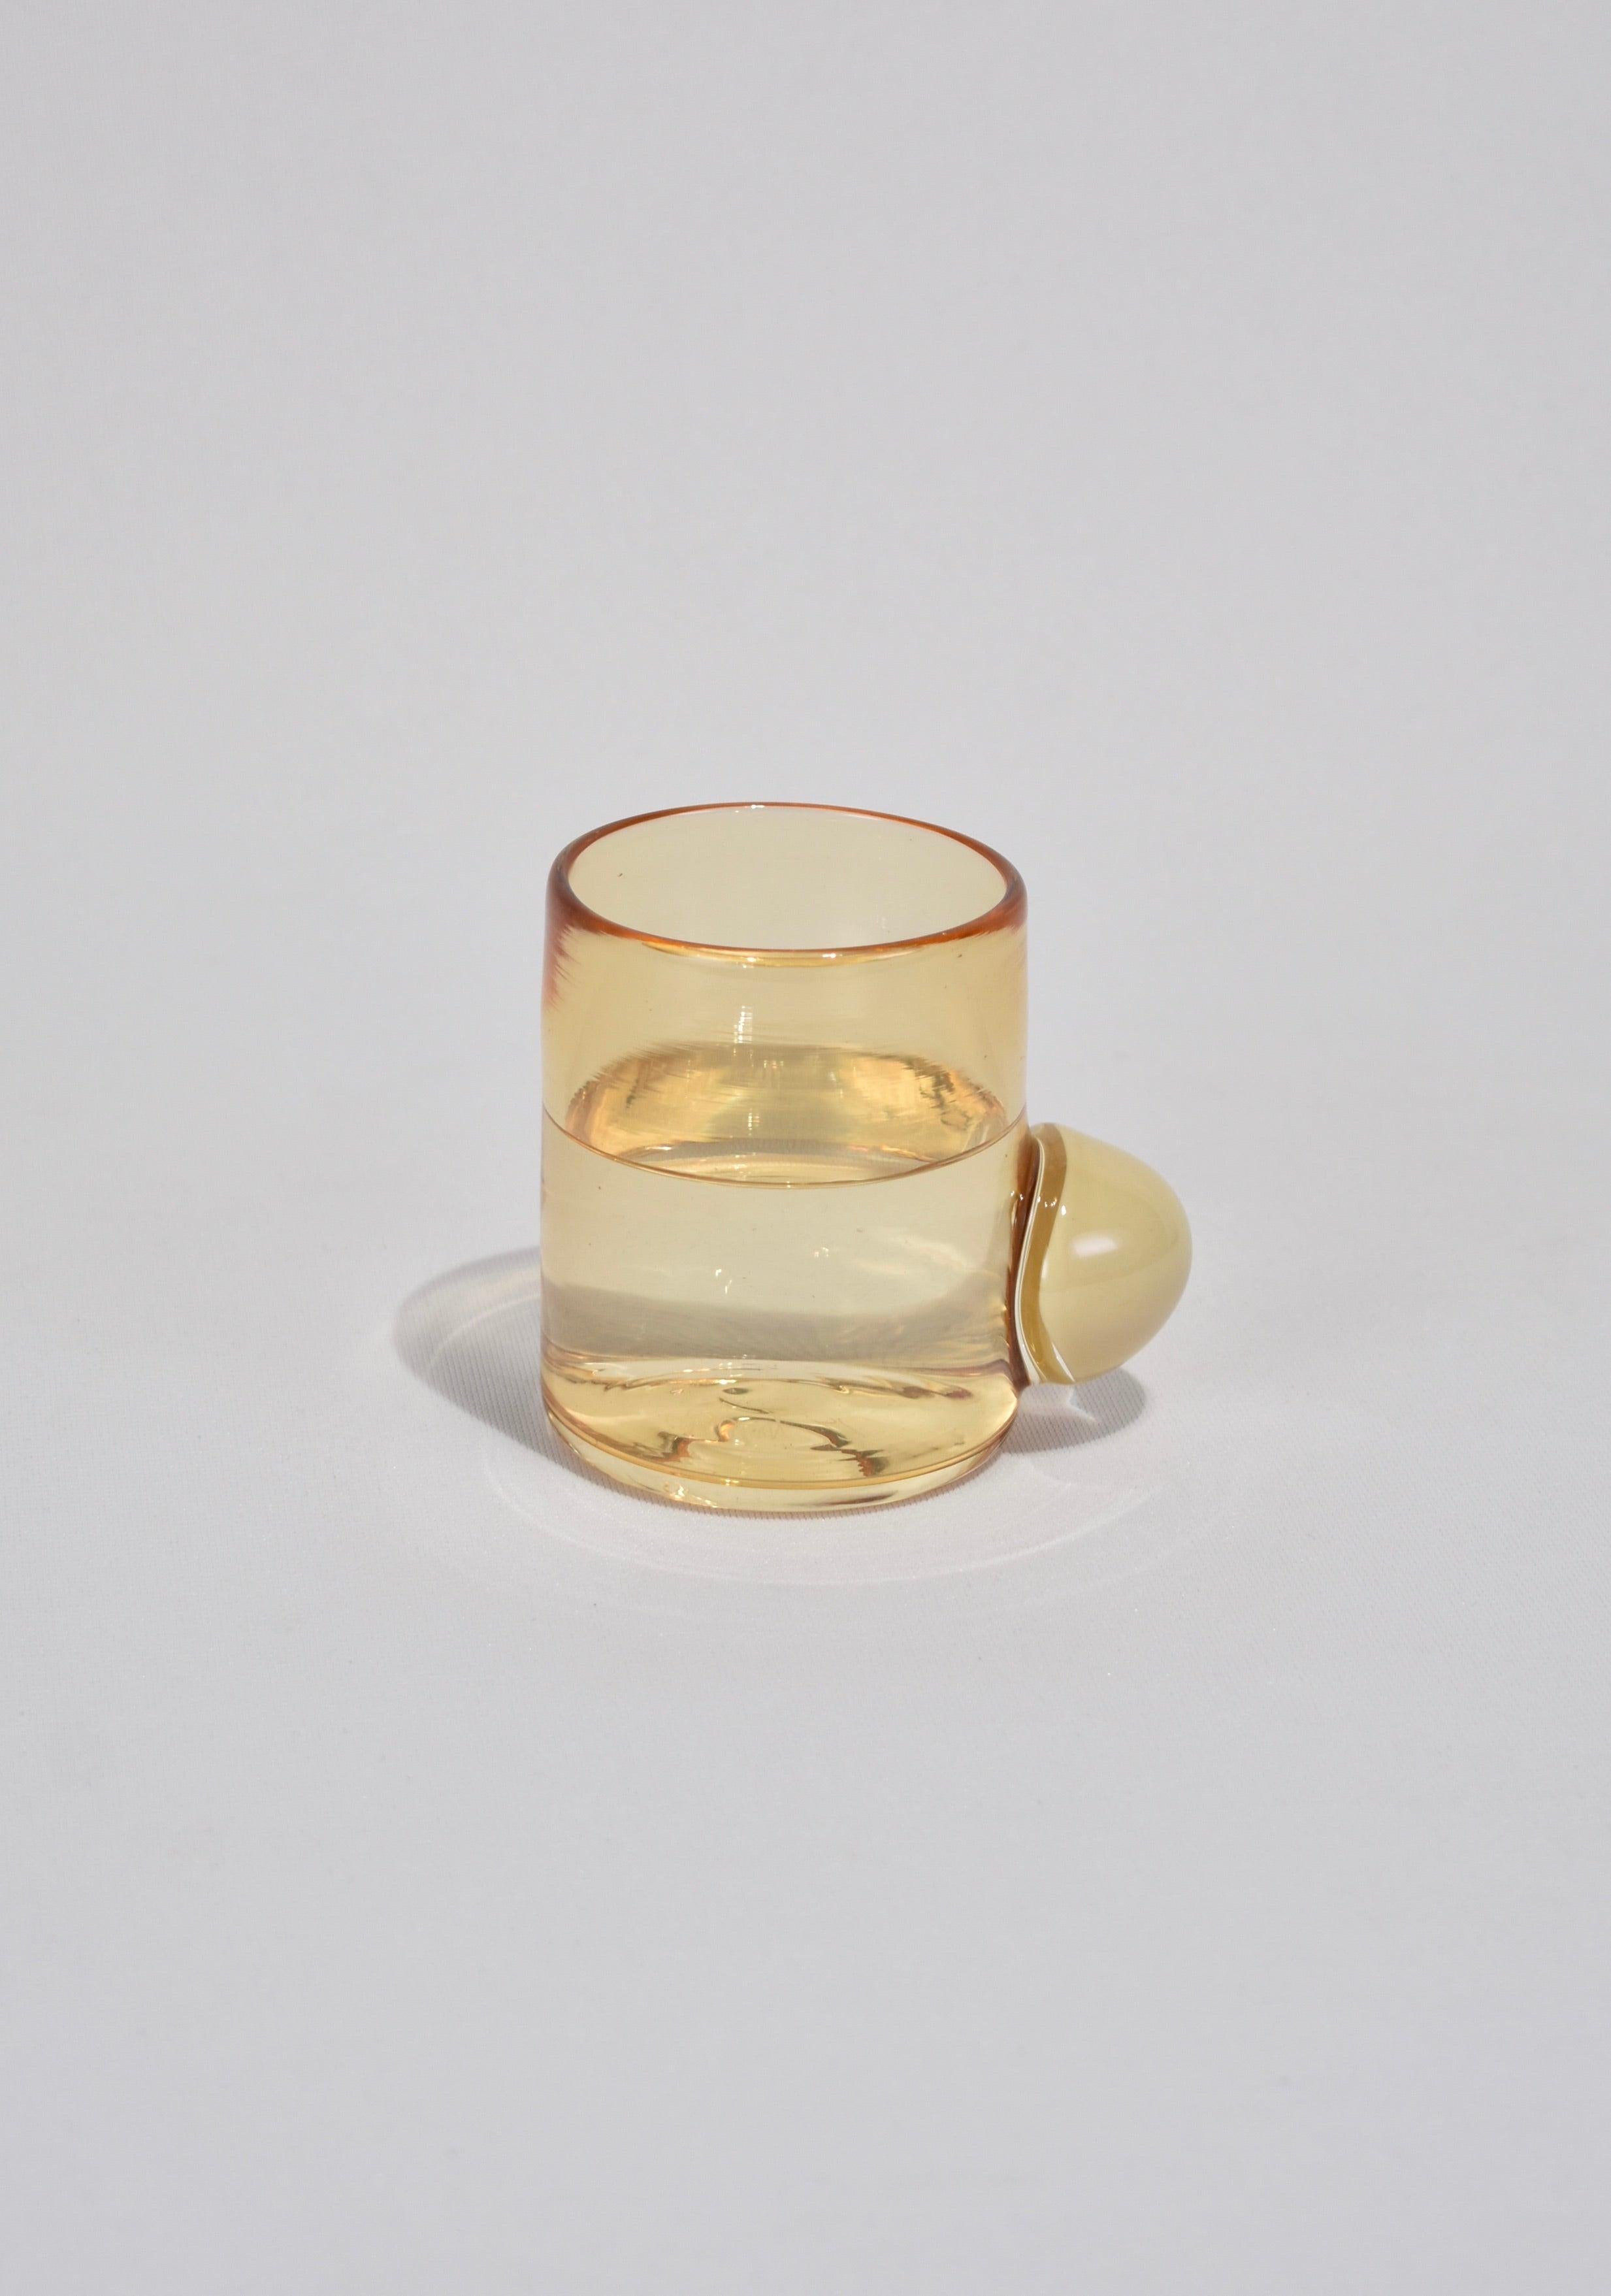 Blown glass tumbler in whiskey with a cream bubble handle. Perfect size for water, wine, juice, or spirits. Handmade in USA by Grace Whiteside of Sticky Glass.

Please note: Due to the handmade nature of this cup, subtle variations in form and